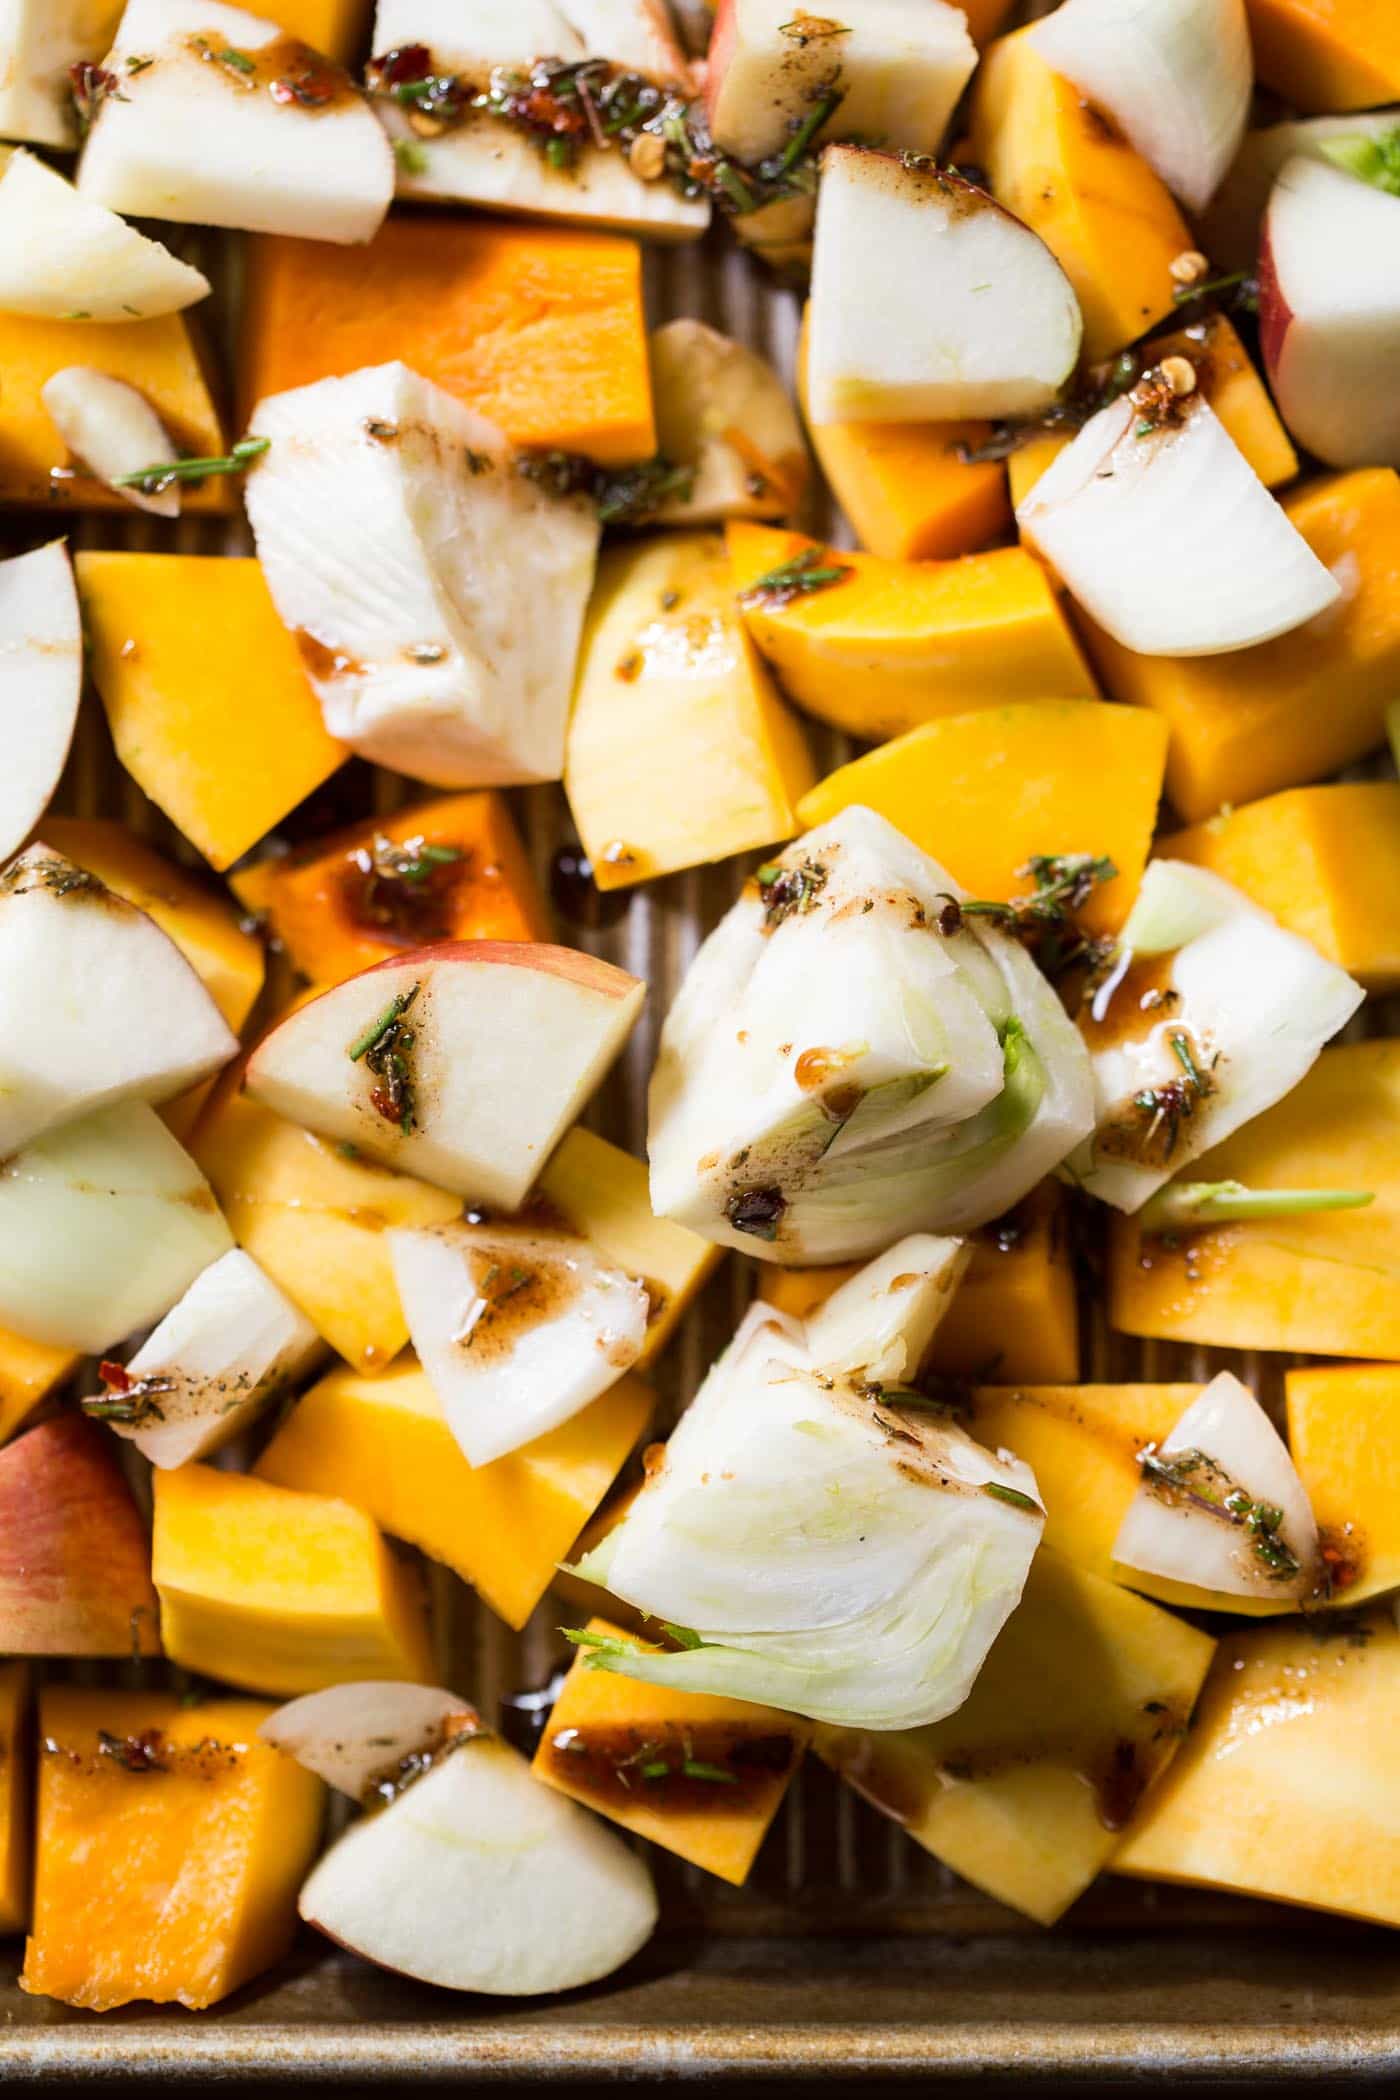 Raw cubed apples, squash, fennel, and onions, coated in herbs, spices, and oil